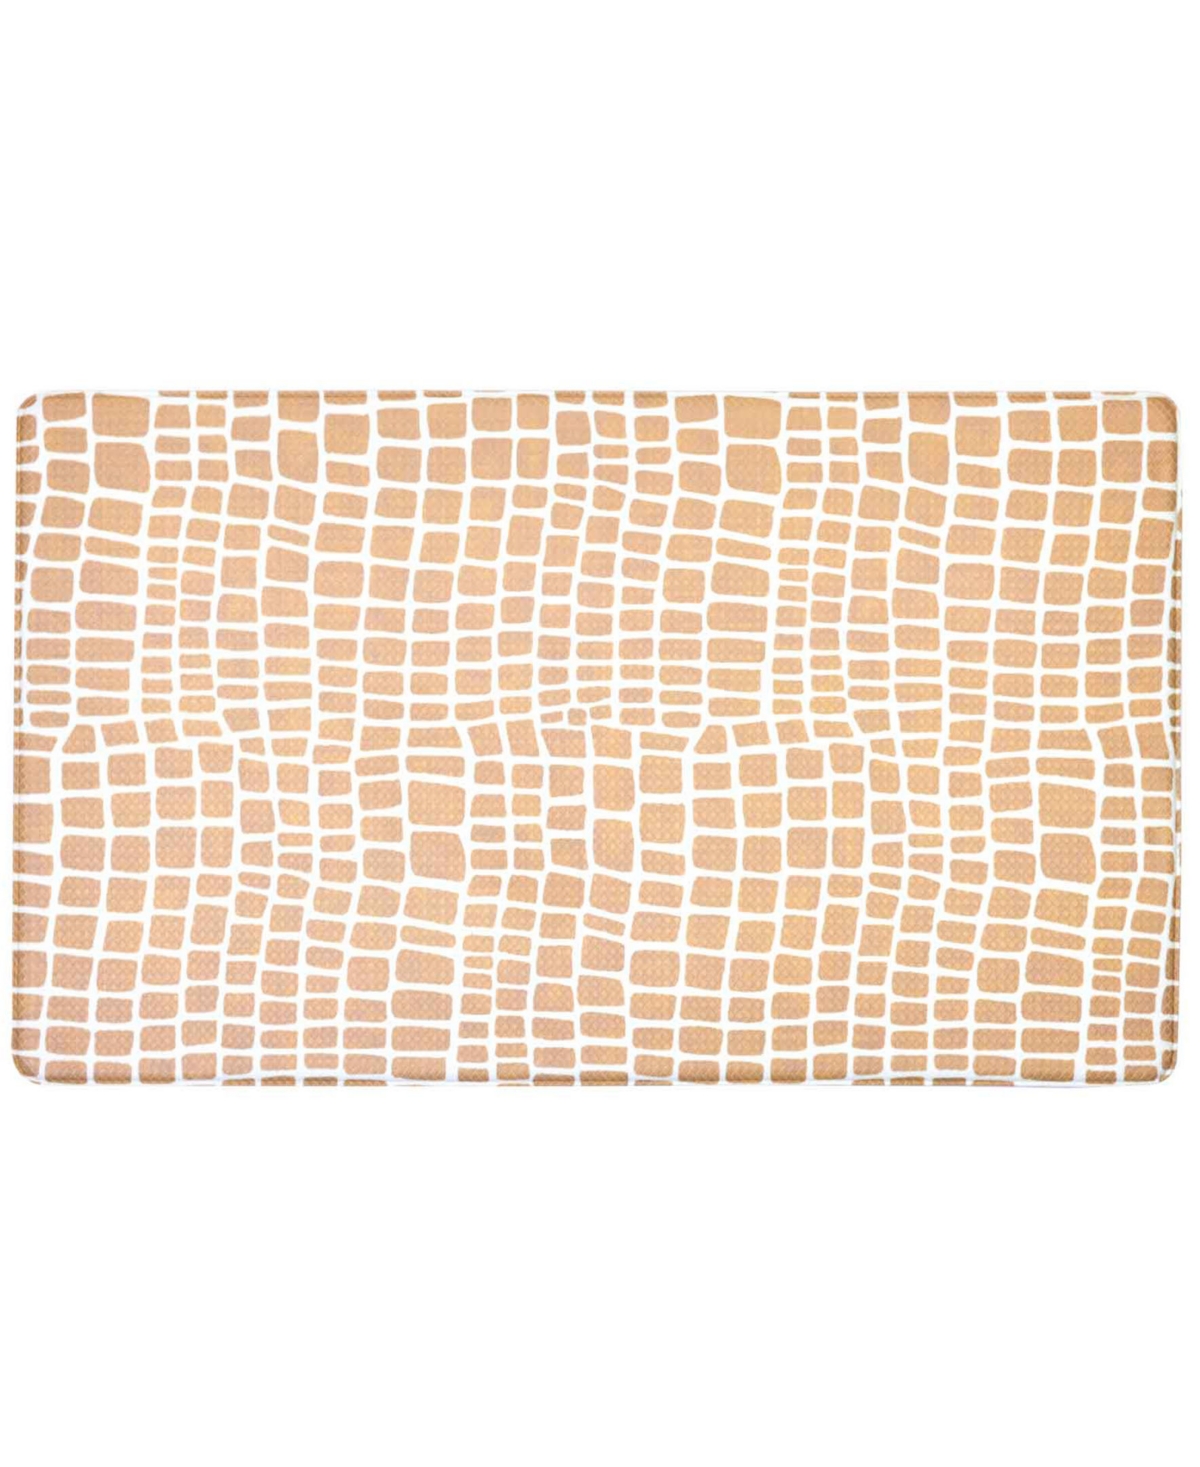 Tommy Bahama Printed Polyvinyl Chloride Fatigue-resistant Mat, 18" X 30" In Crocodile Beige